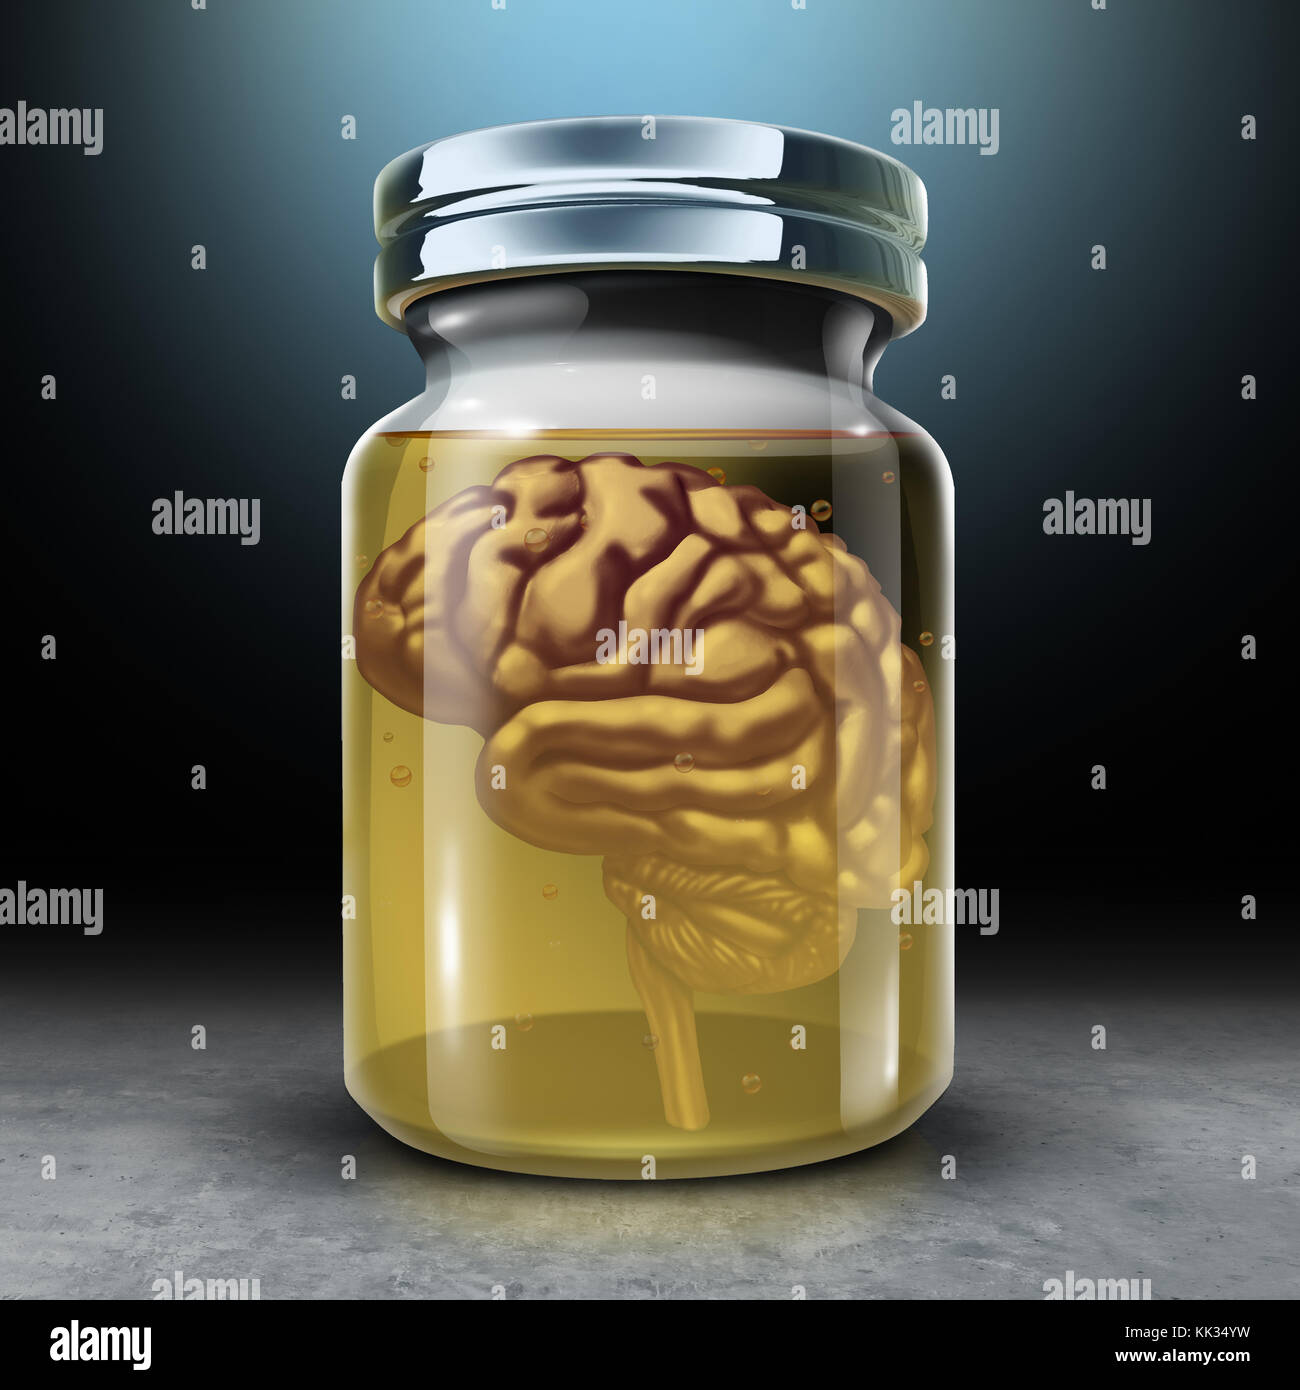 Preserve your mind and brain preservation as a medical and psychology symbol for protecting memories and preserving neurology health. Stock Photo